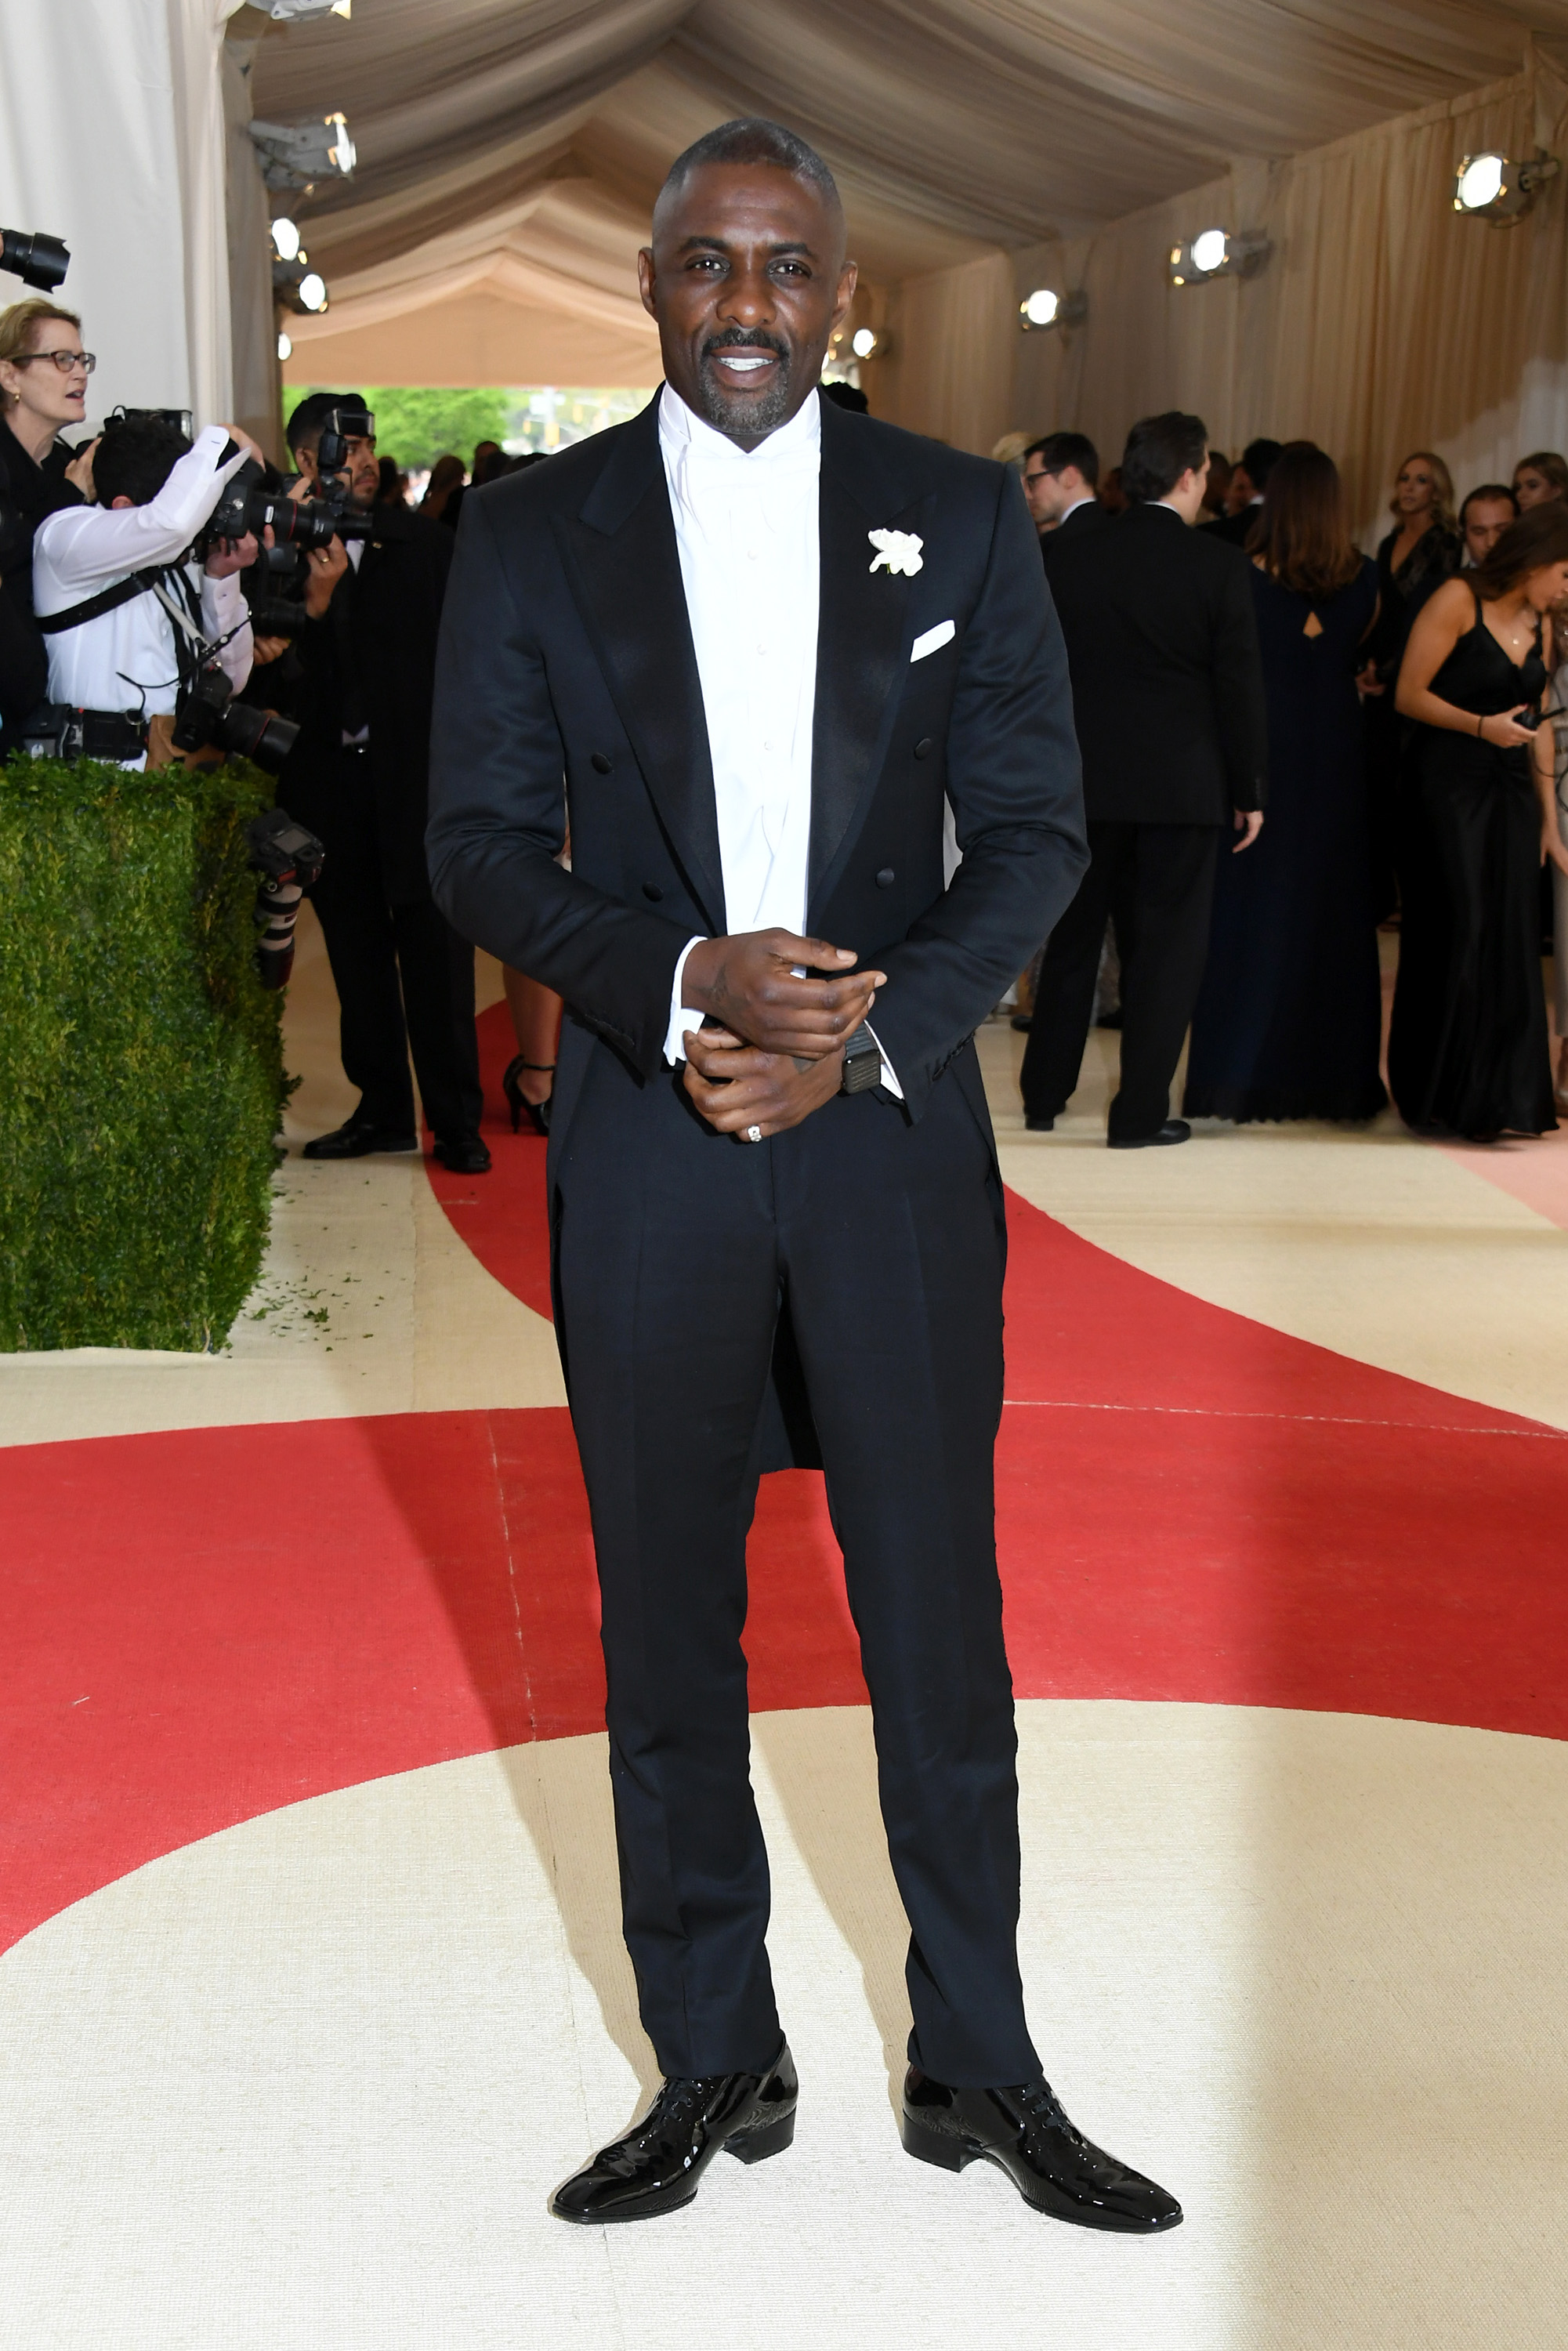 Idris Elba attends  Manus x Machina: Fashion In An Age Of Technology  Costume Institute Gala at Metropolitan Museum of Art on May 2, 2016 in New York City.